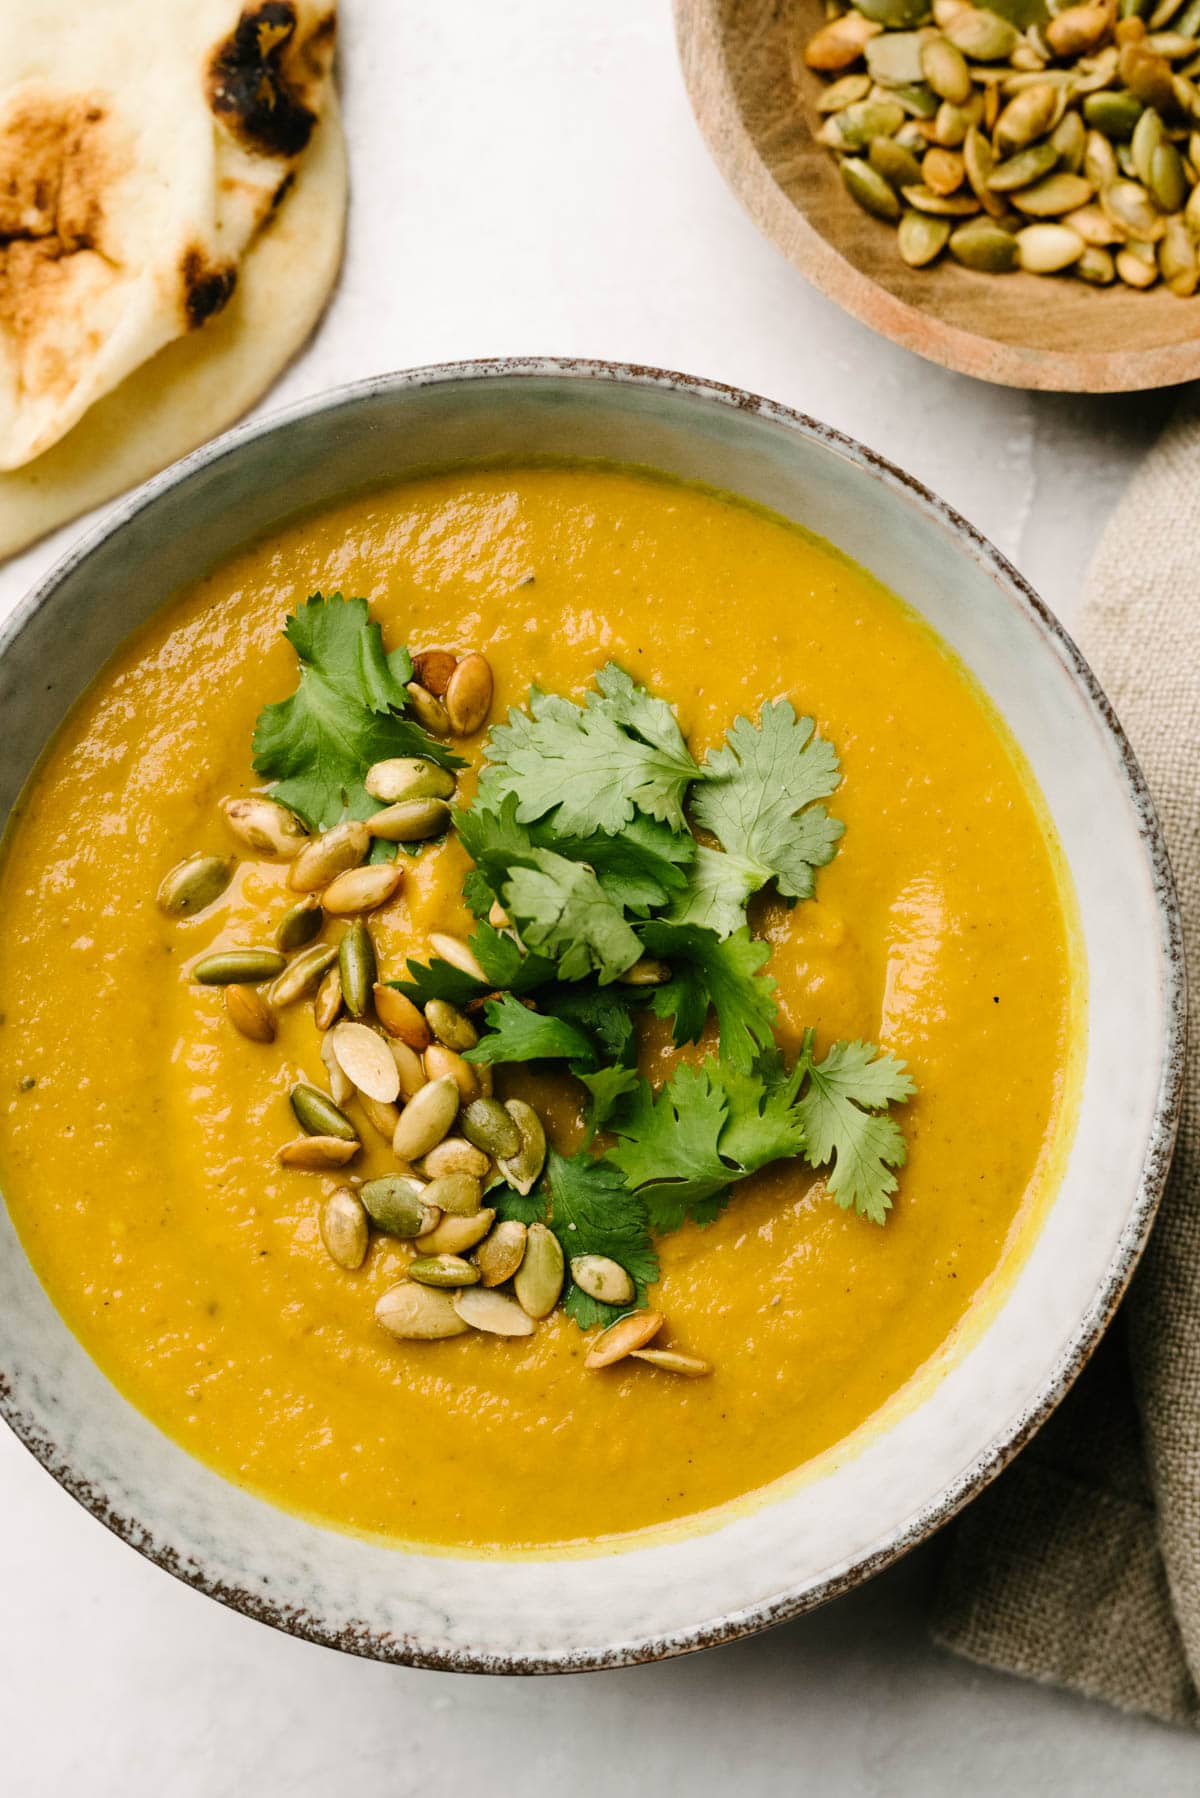 A bowl of pumpkin curry soup topped with pepitas and cilantro, with naan bread and a bowl of pumpkin seeds to the side.